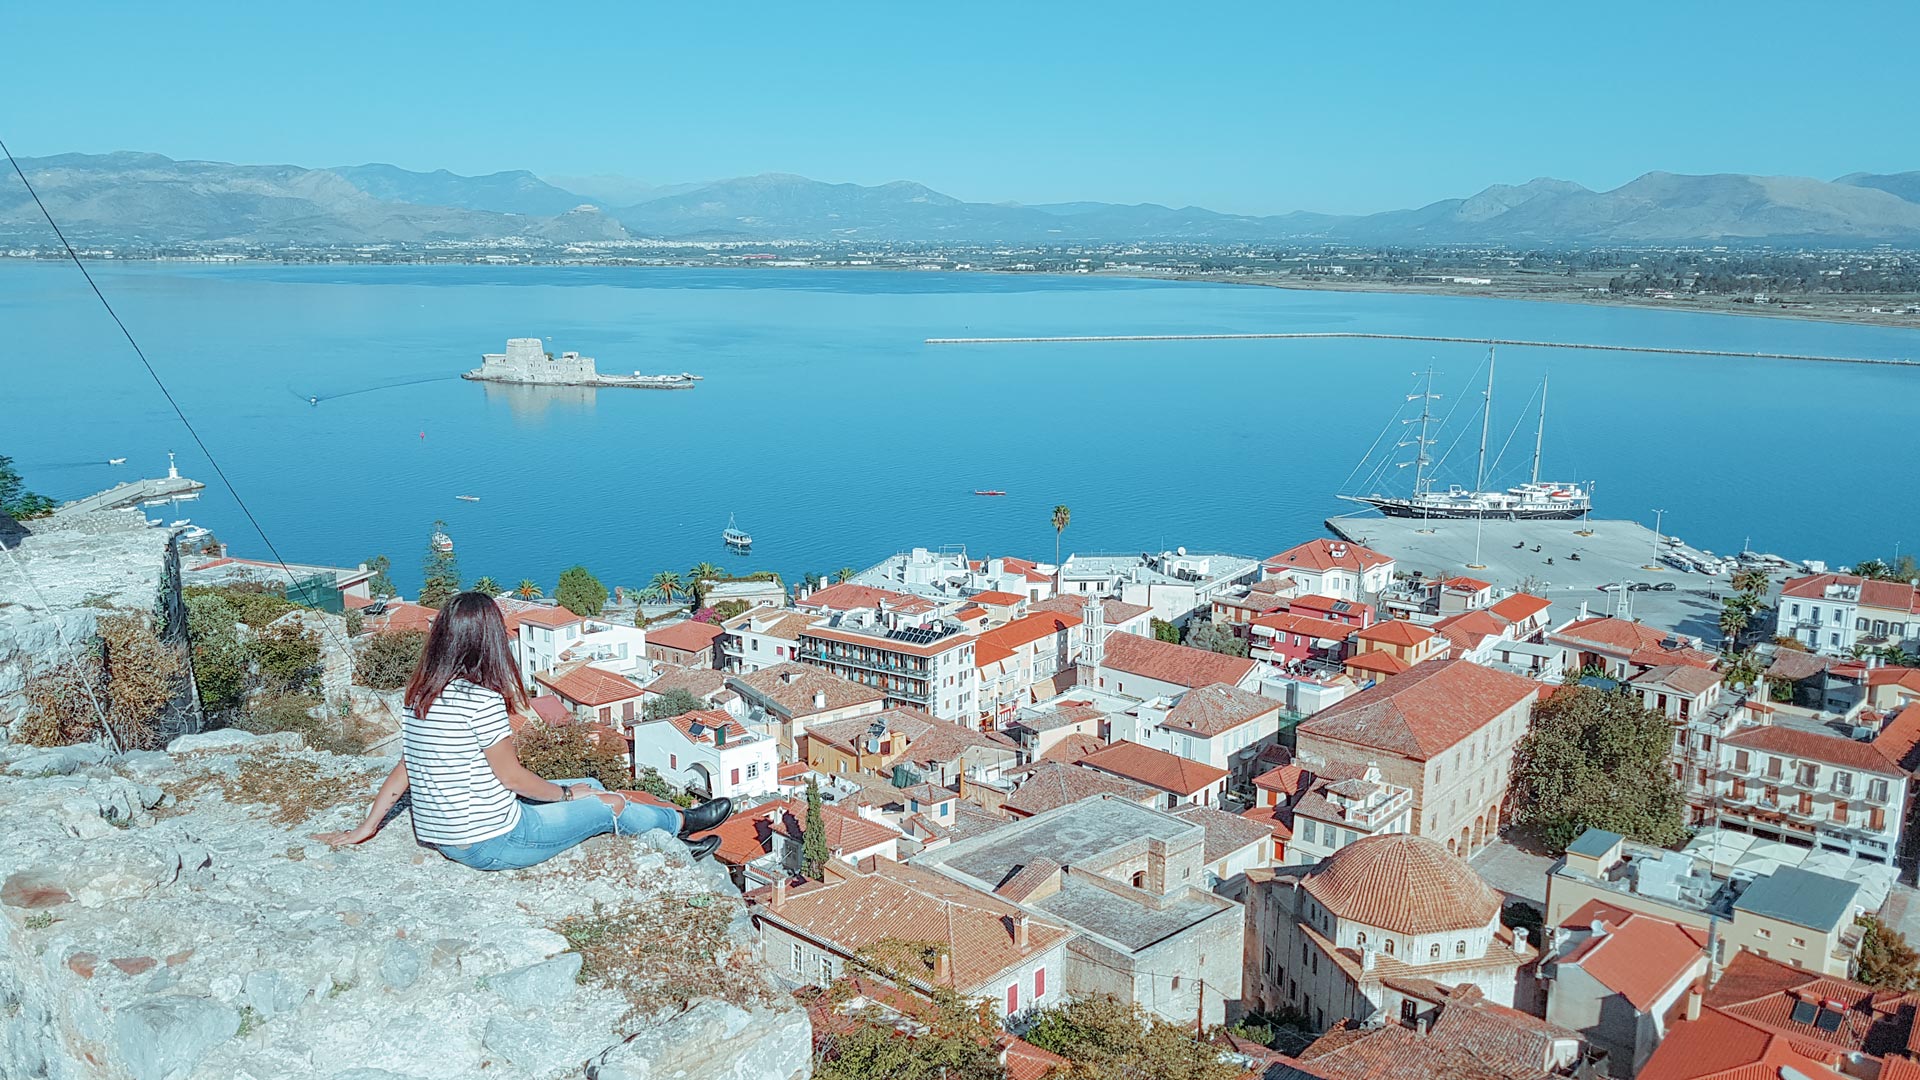 When it comes to romantic escapes, there’s one town that springs to mind for Greeks Nafplio, the Venetian’s ‘Naples of the East’